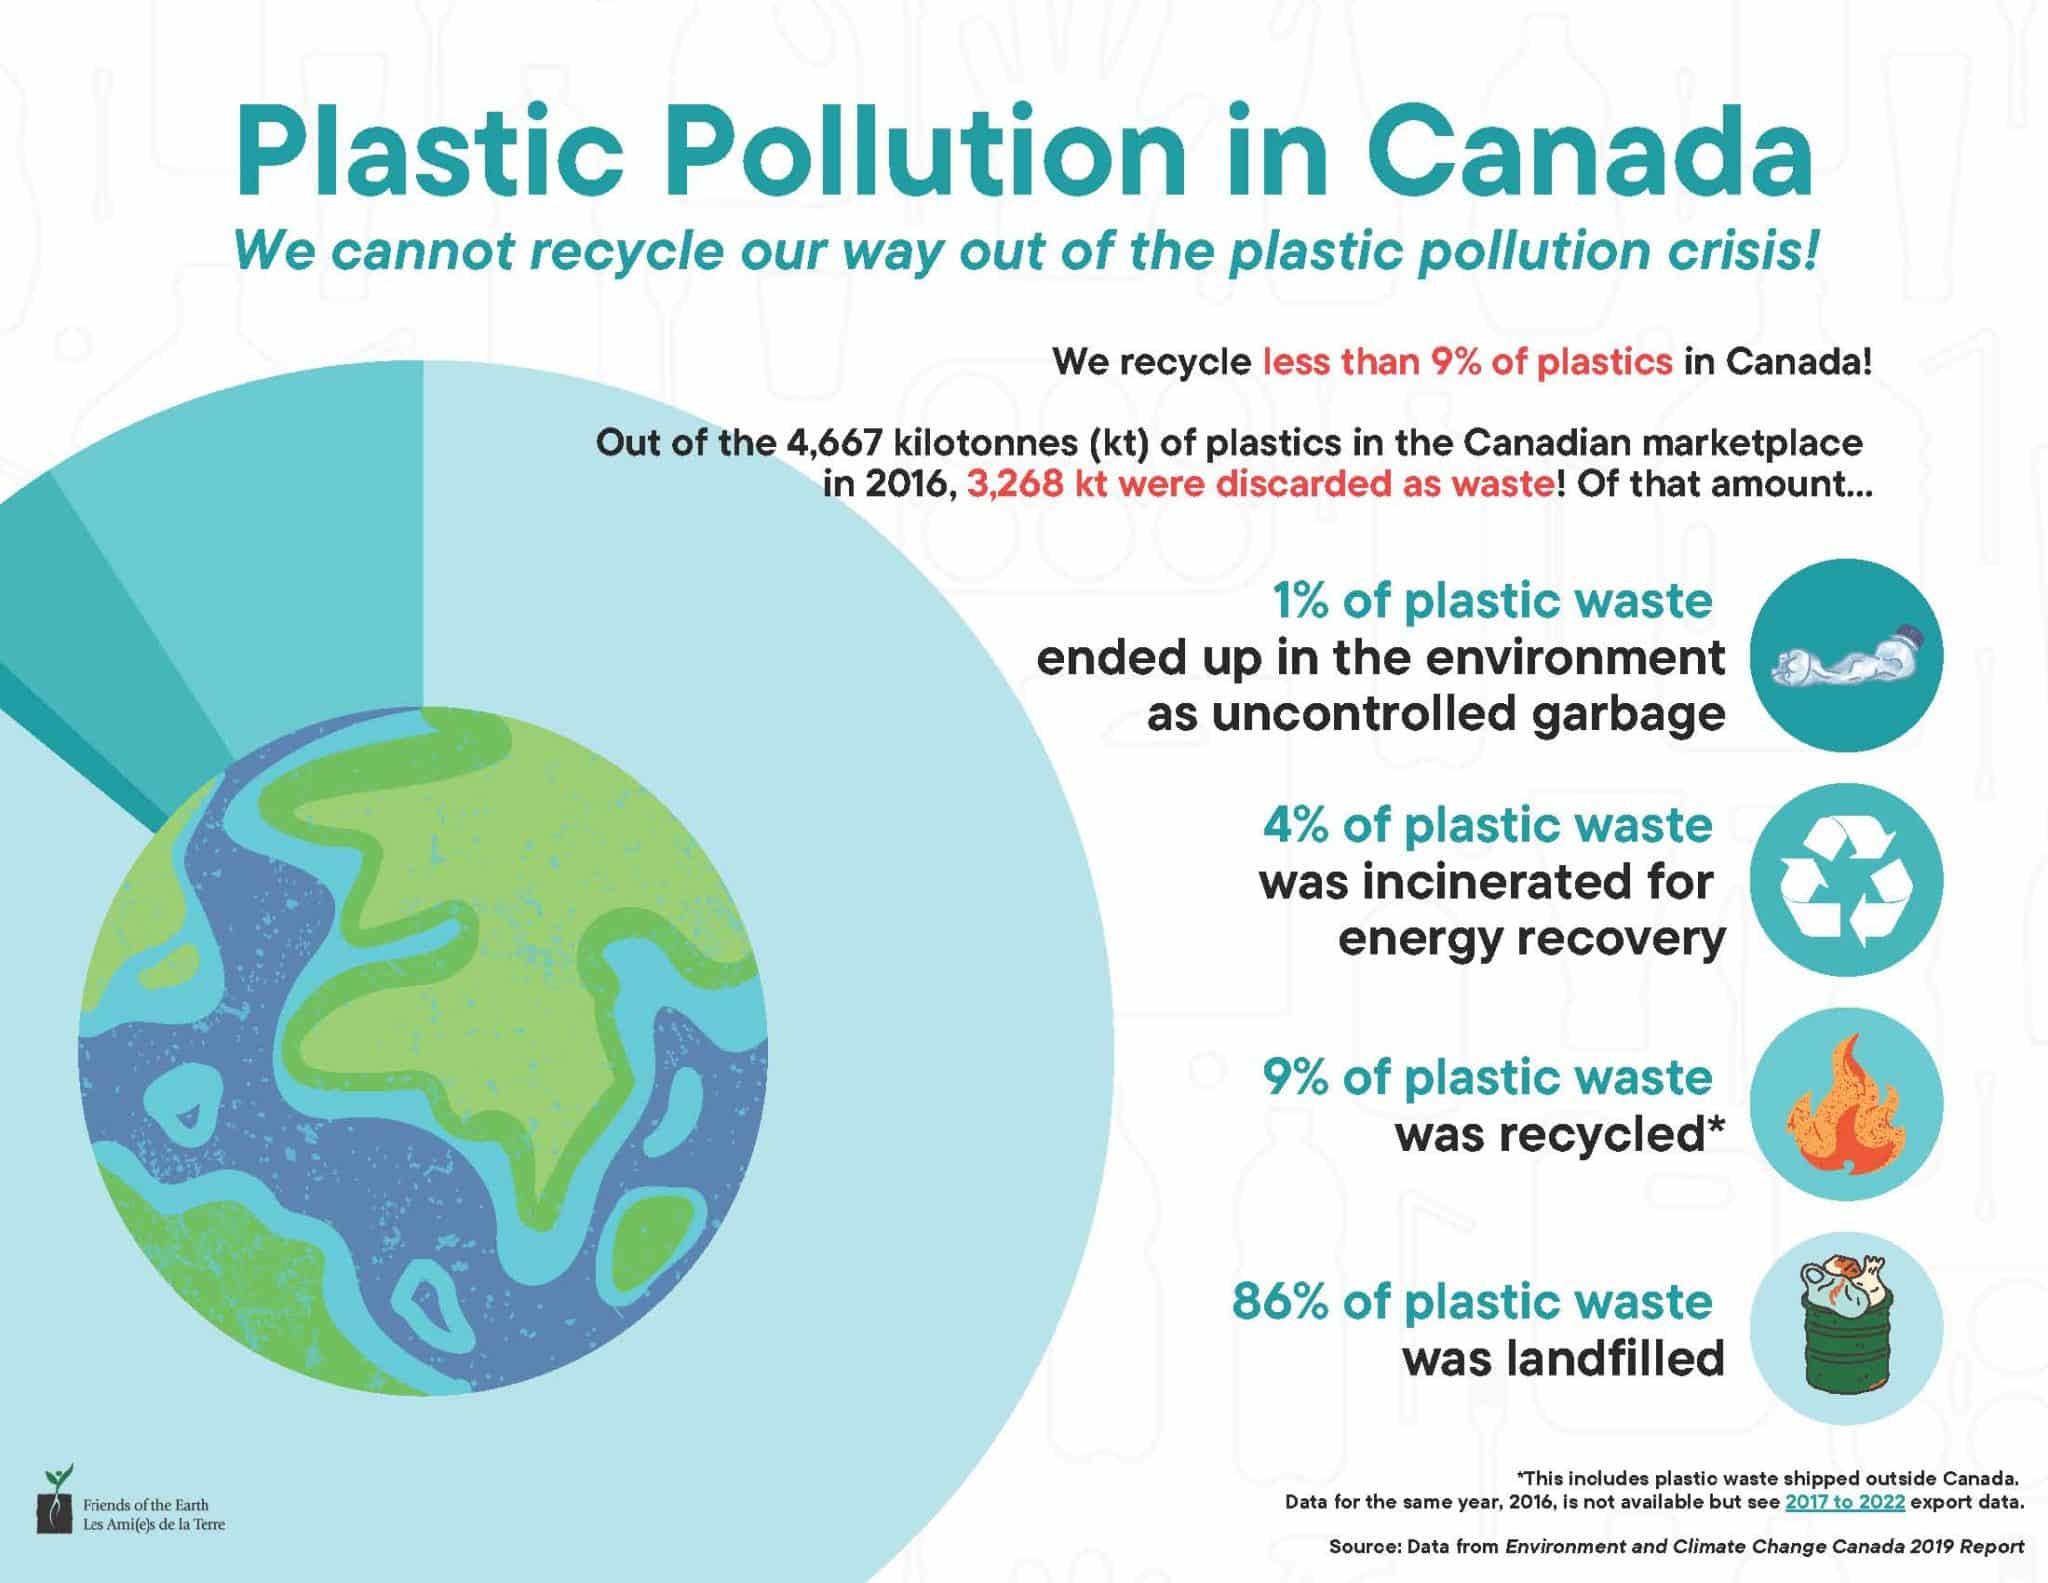 Plastic Pollution in Canada. We cannot recyle our way out of the plastic pollution crisis! We recycle less than 9% of plastics in Canada! Out of the 4,667 kilotonnes (kt) of plastics in the Canadian marketplace in 2016, 3,268 kt were discarded as waste ! Of that amount... 1% of plastic waste ended up in the environmentas uncontrolled garbage. 4% of plastic waste was incinerated for energy recovery. 9% of plastic waste was recycled*. 86% of plastic waste was landfilled. *This includes plastic waste shipped outside Canada. Data for the same year, 2016, is not available but see 2017 to 2022 export data. Source: Data from Environment and Climate Change Canada 2019 Report.